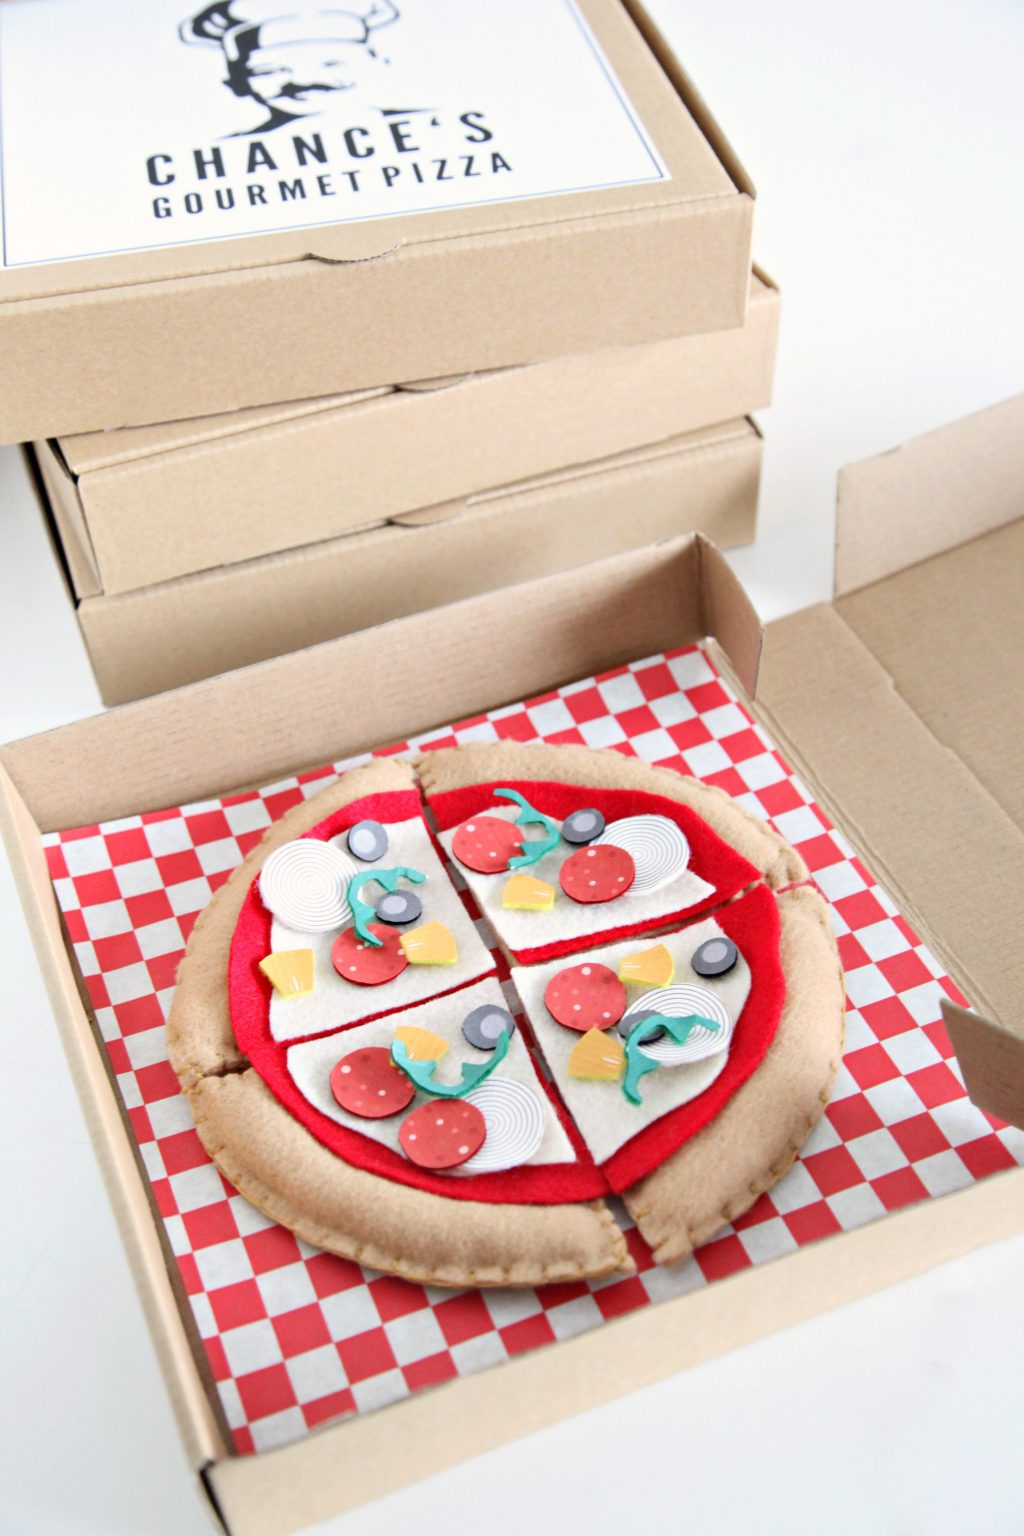 7 DIY Birthday Party Essentials You Can Make by Yourself + a tutorial featured by Top US Craft Blog + The Pretty Life Girls: DIY Felt Pizza Party Favors